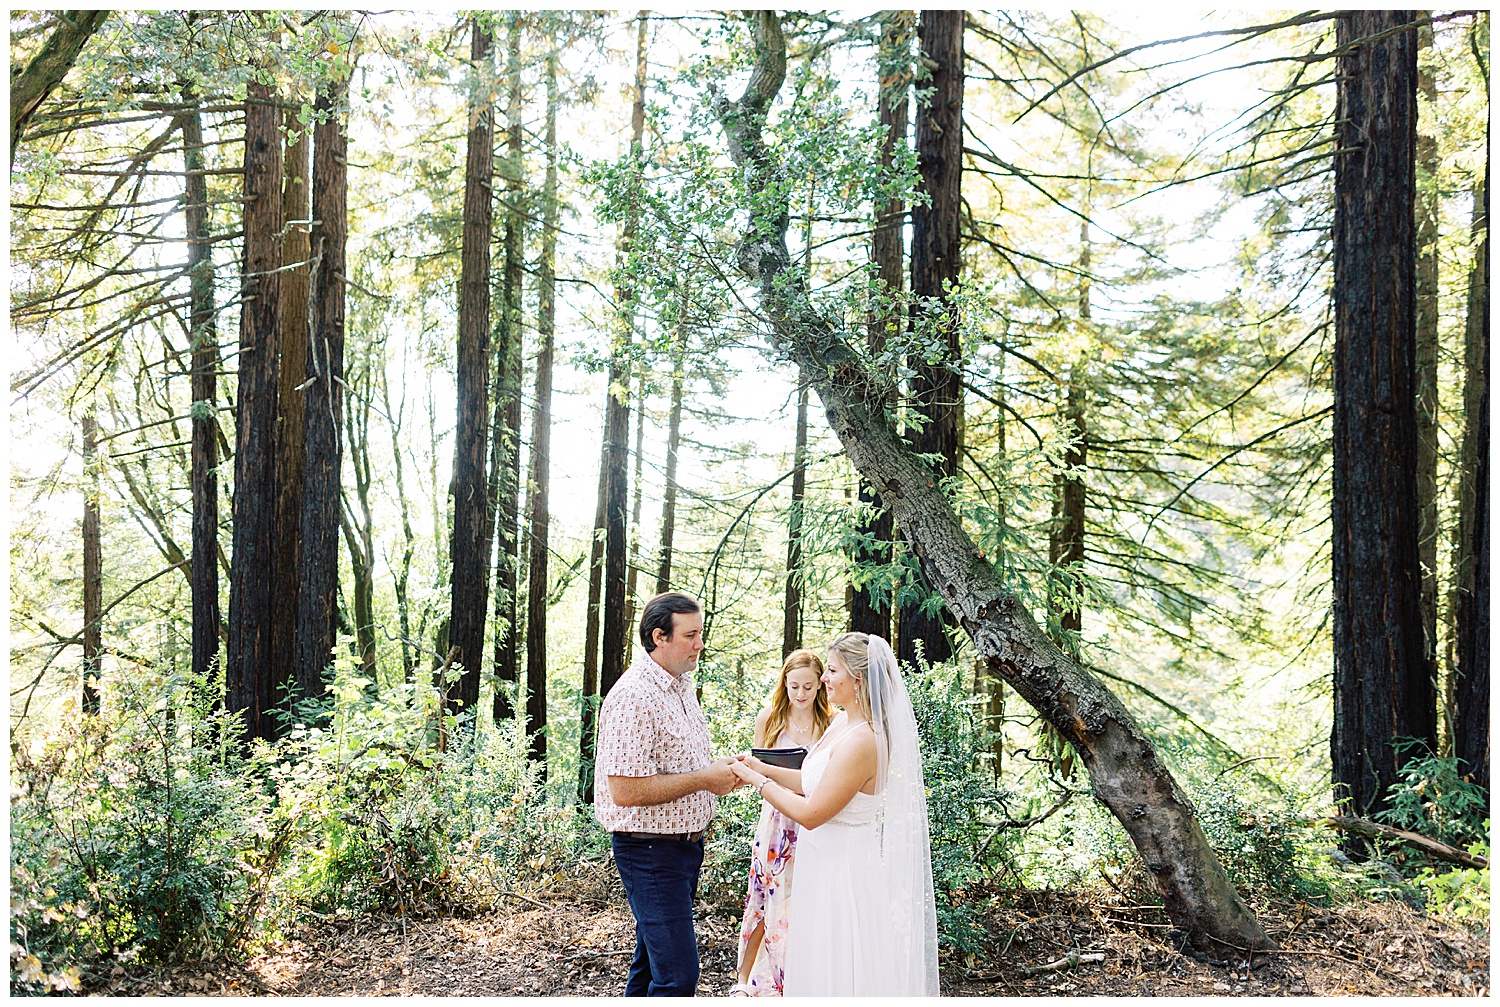 the bride and groom's wedding reception in Joaquin Miller Park where they and their officiant are surrounded by mossy trees